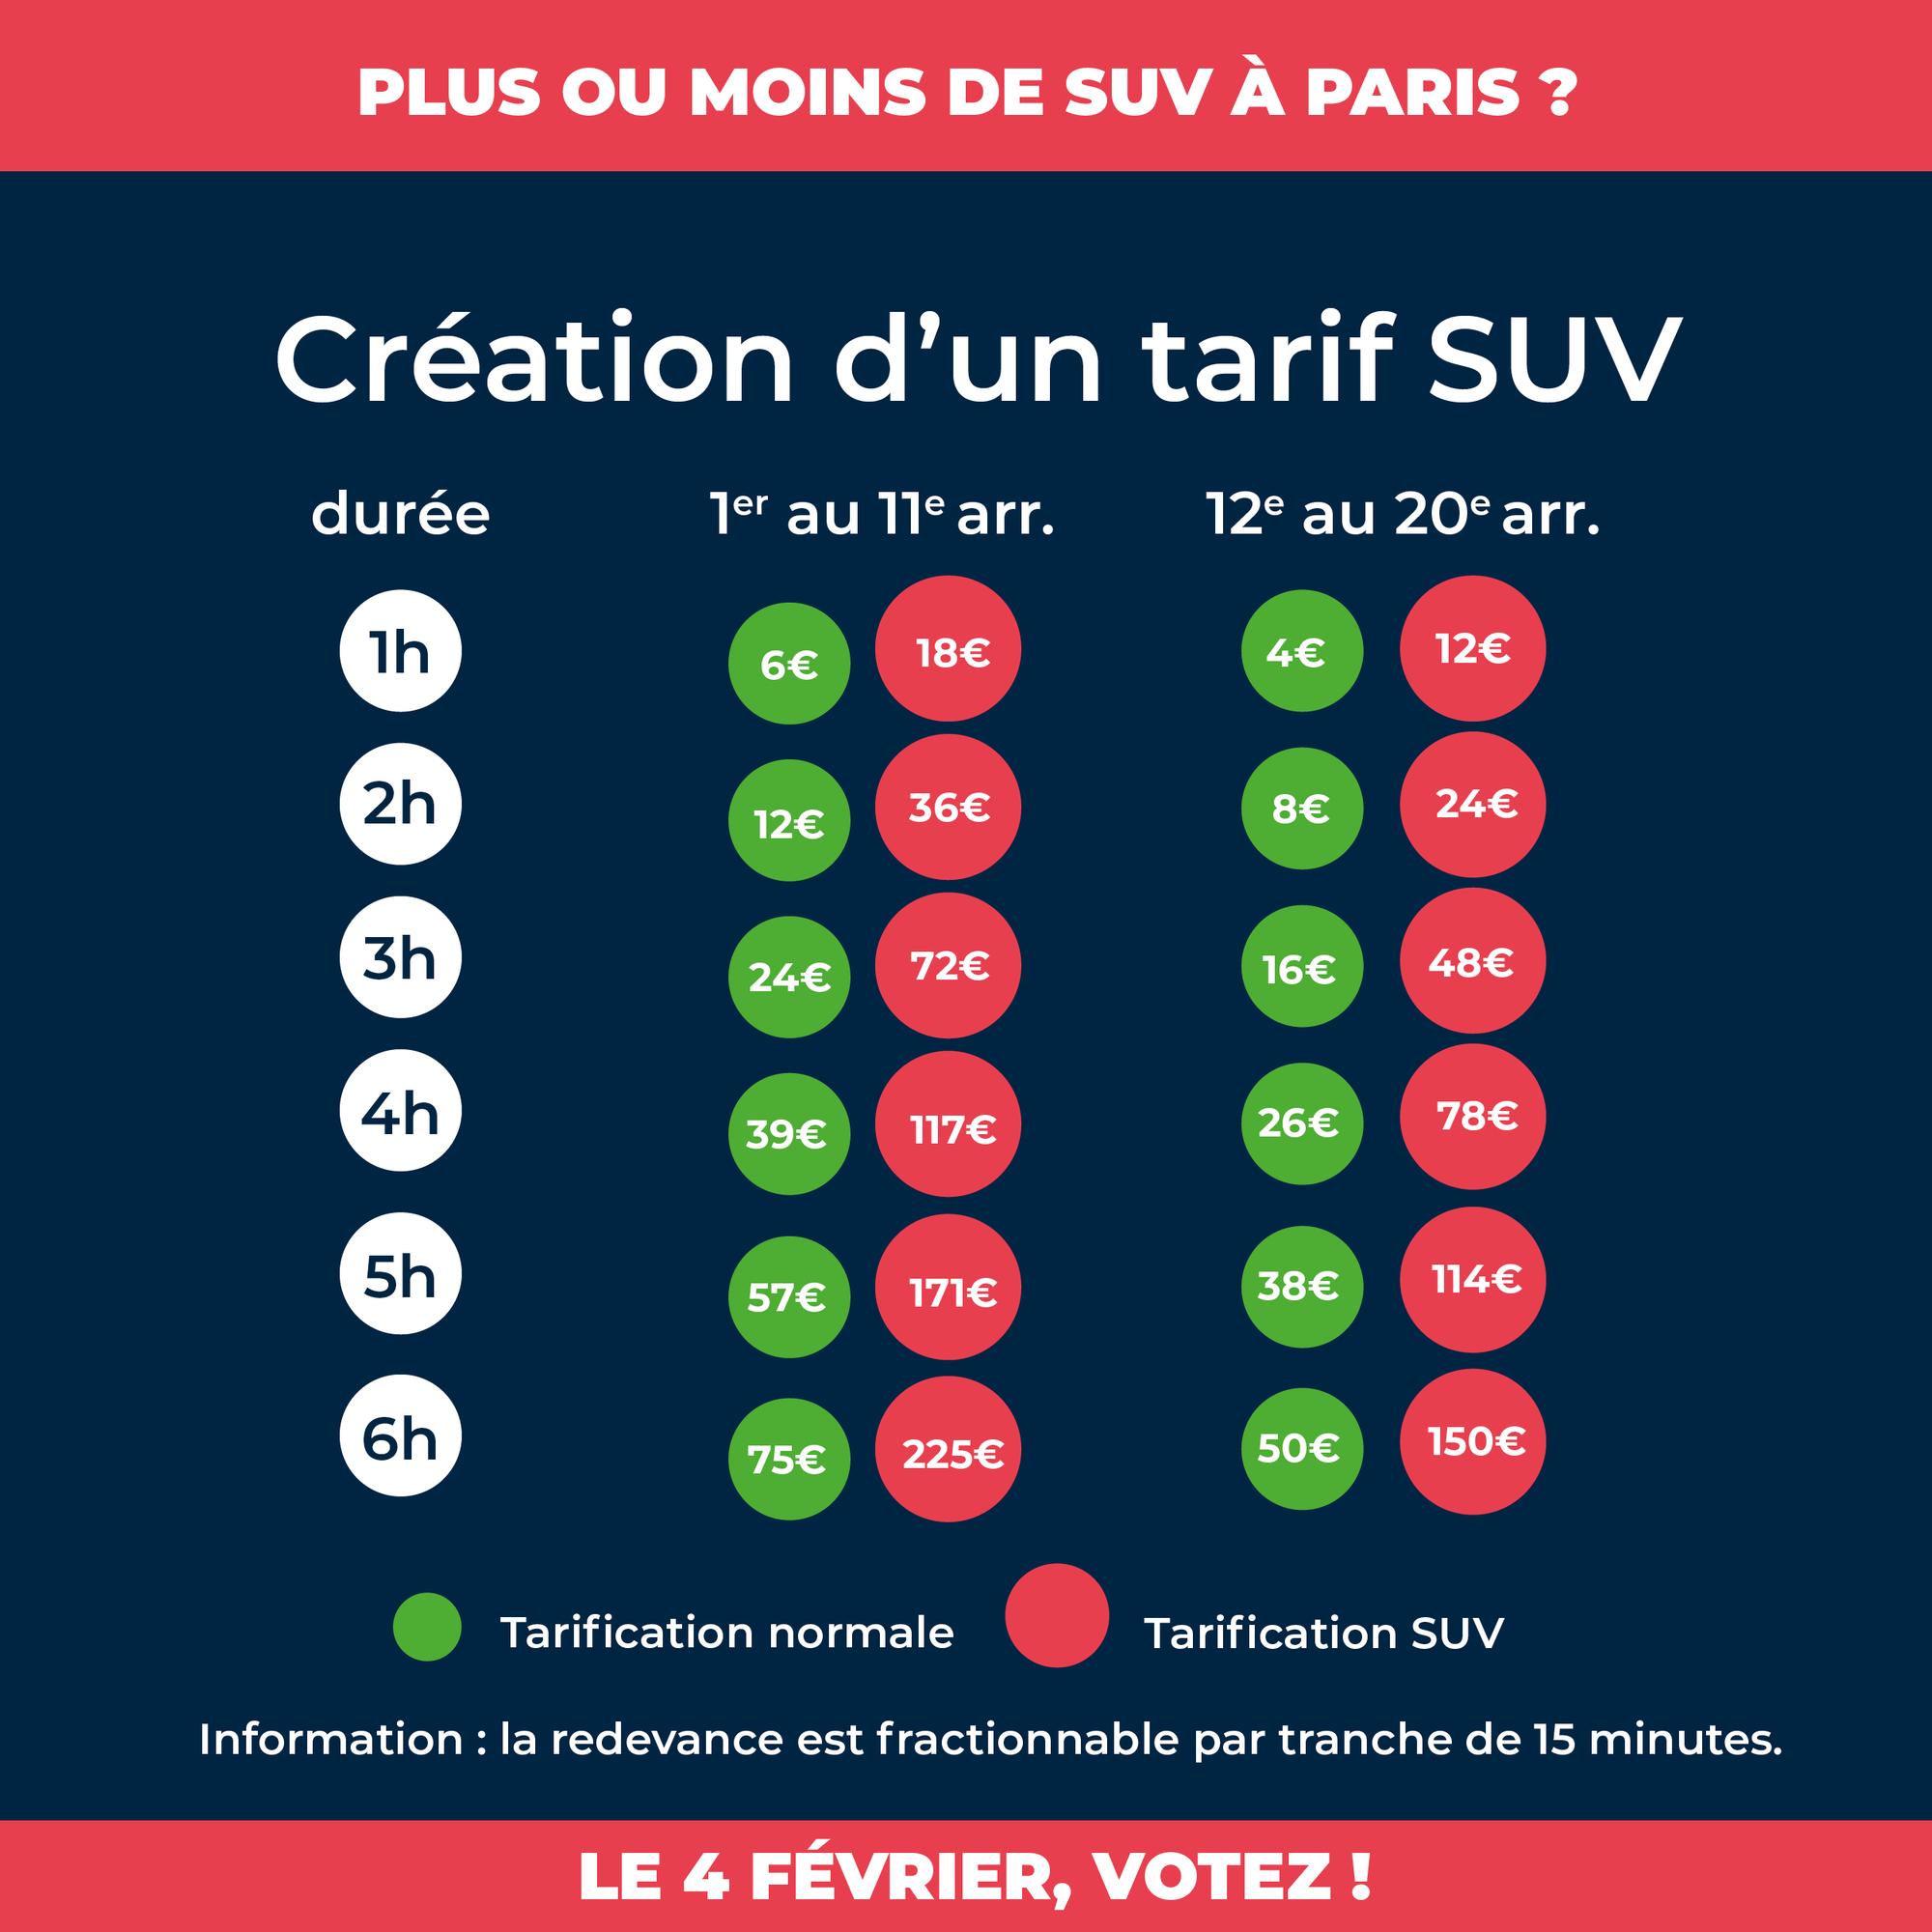 The proposed scale of charges (Mayor of Paris)